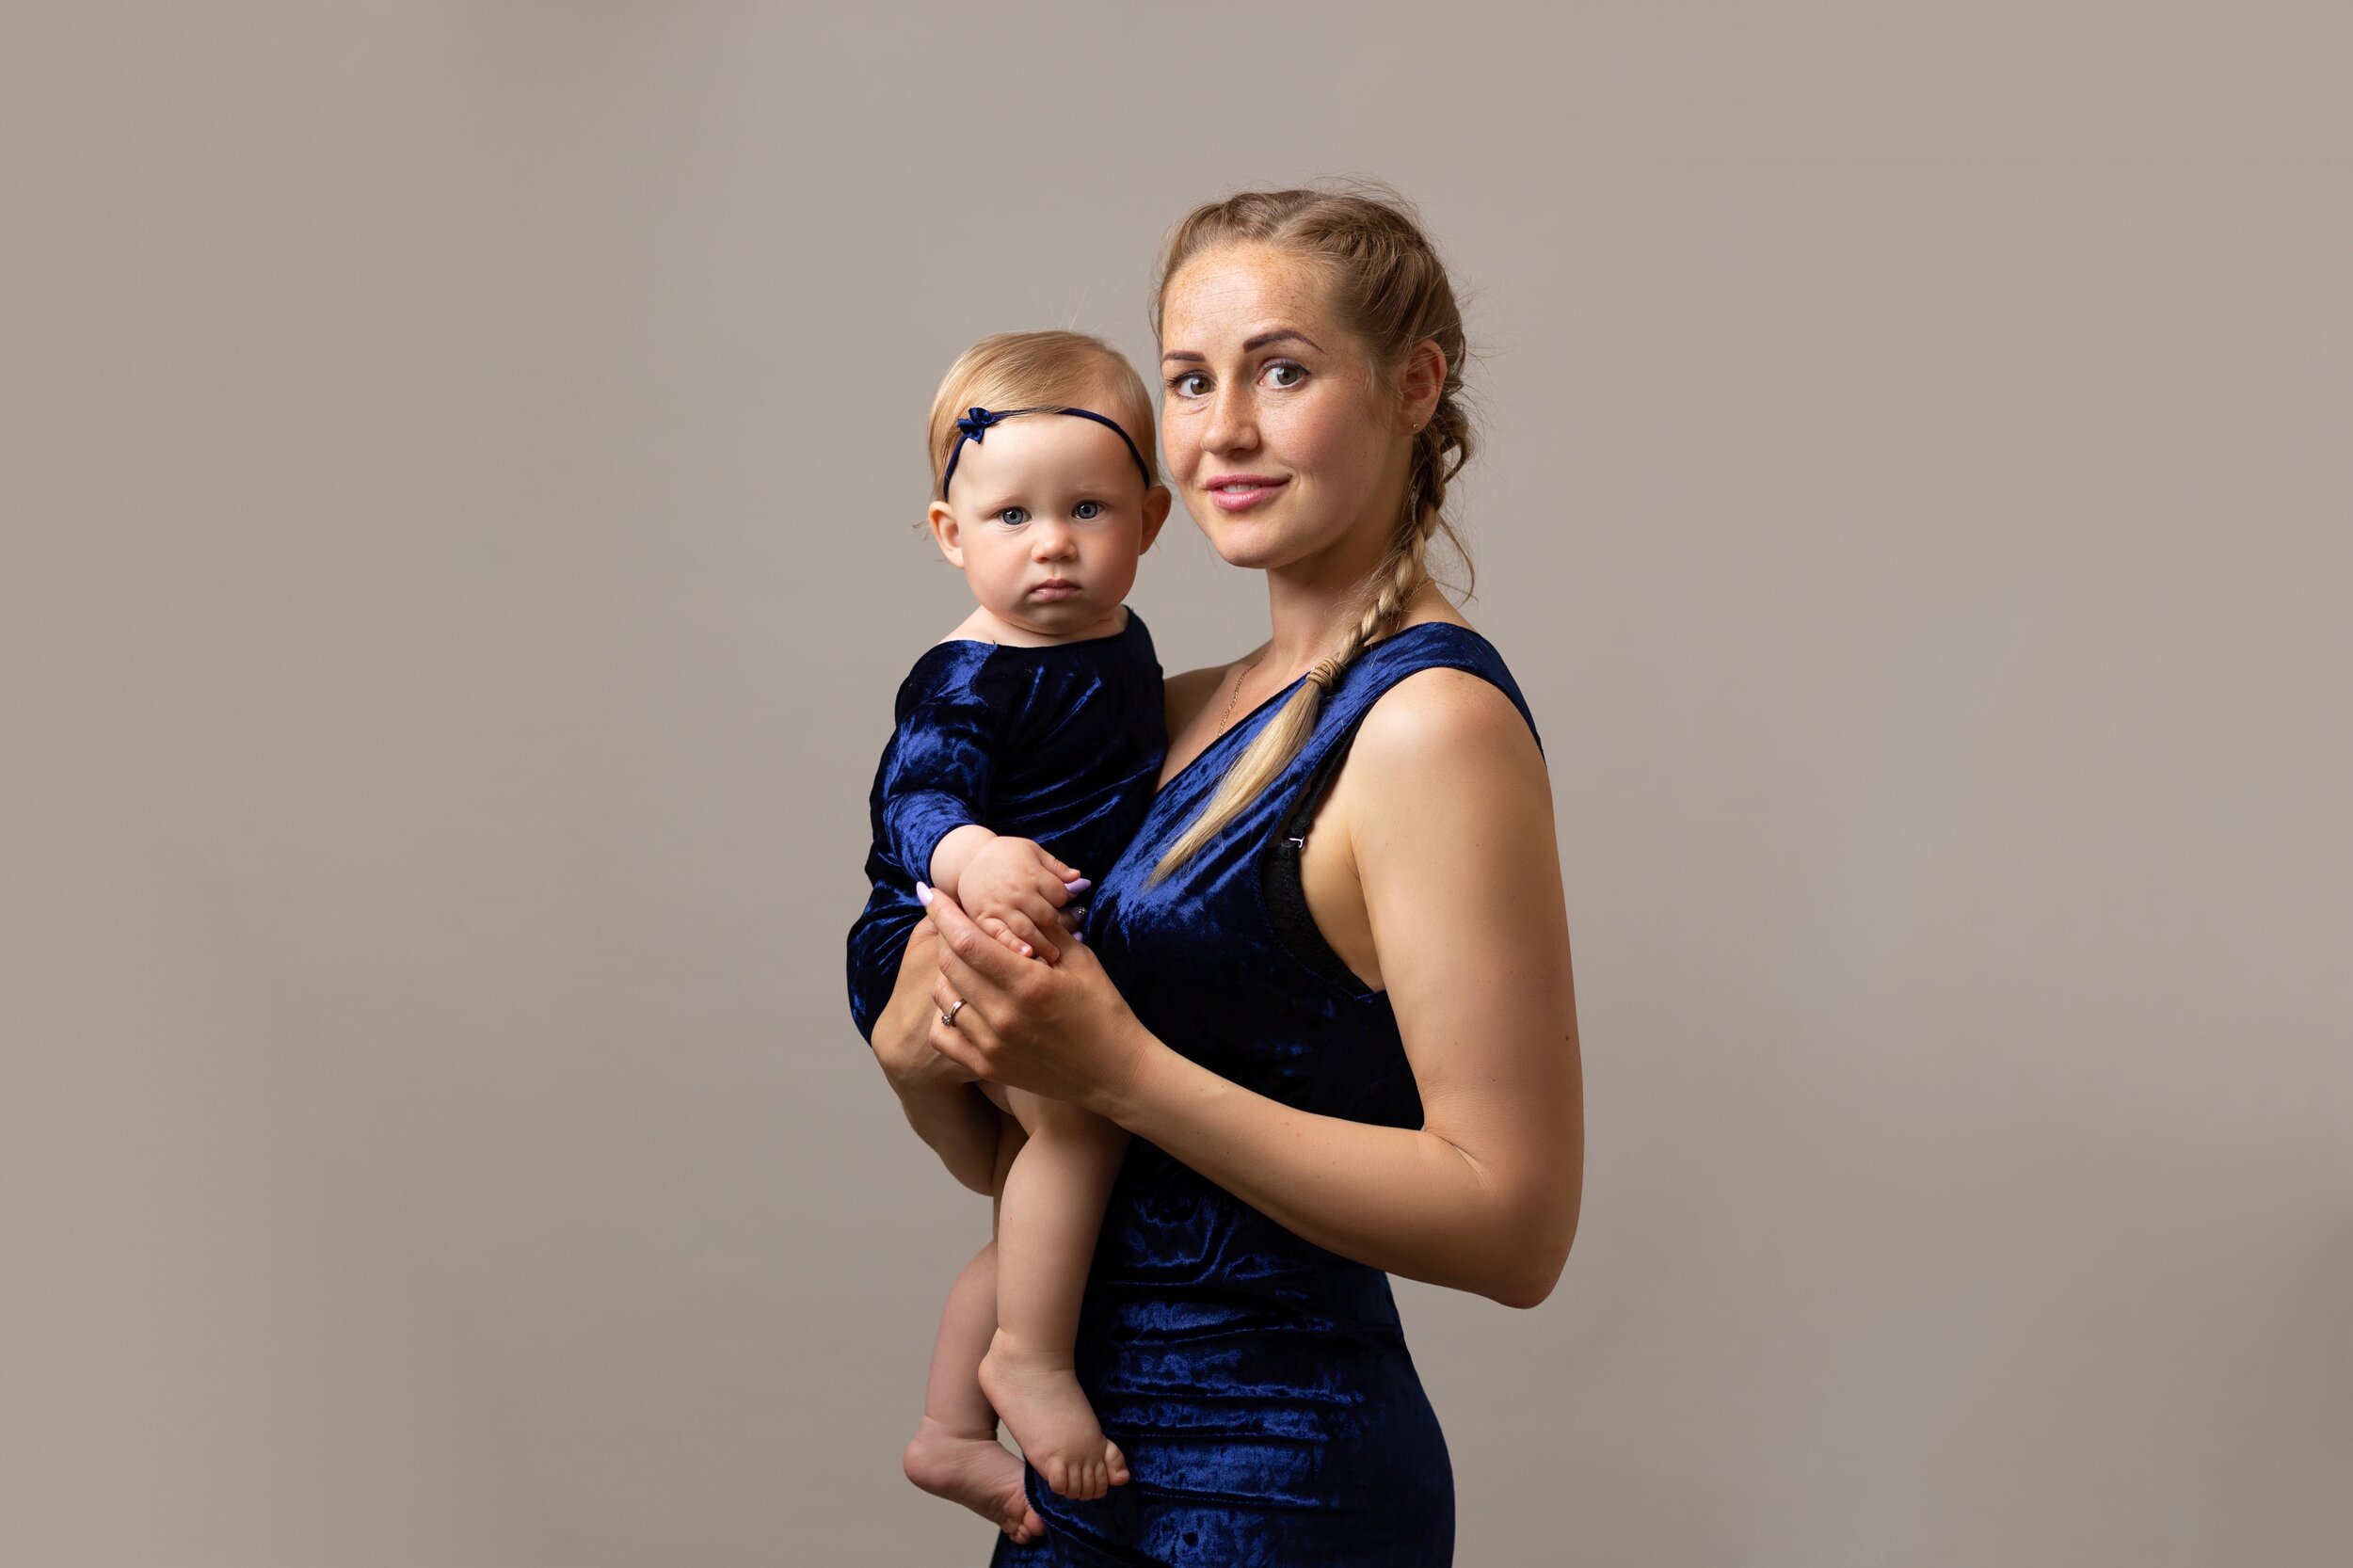 mommy-and-me-mother-and-daughter-photoshoot-lea-cooper-photography-willenhall-wolverhampton.jpg